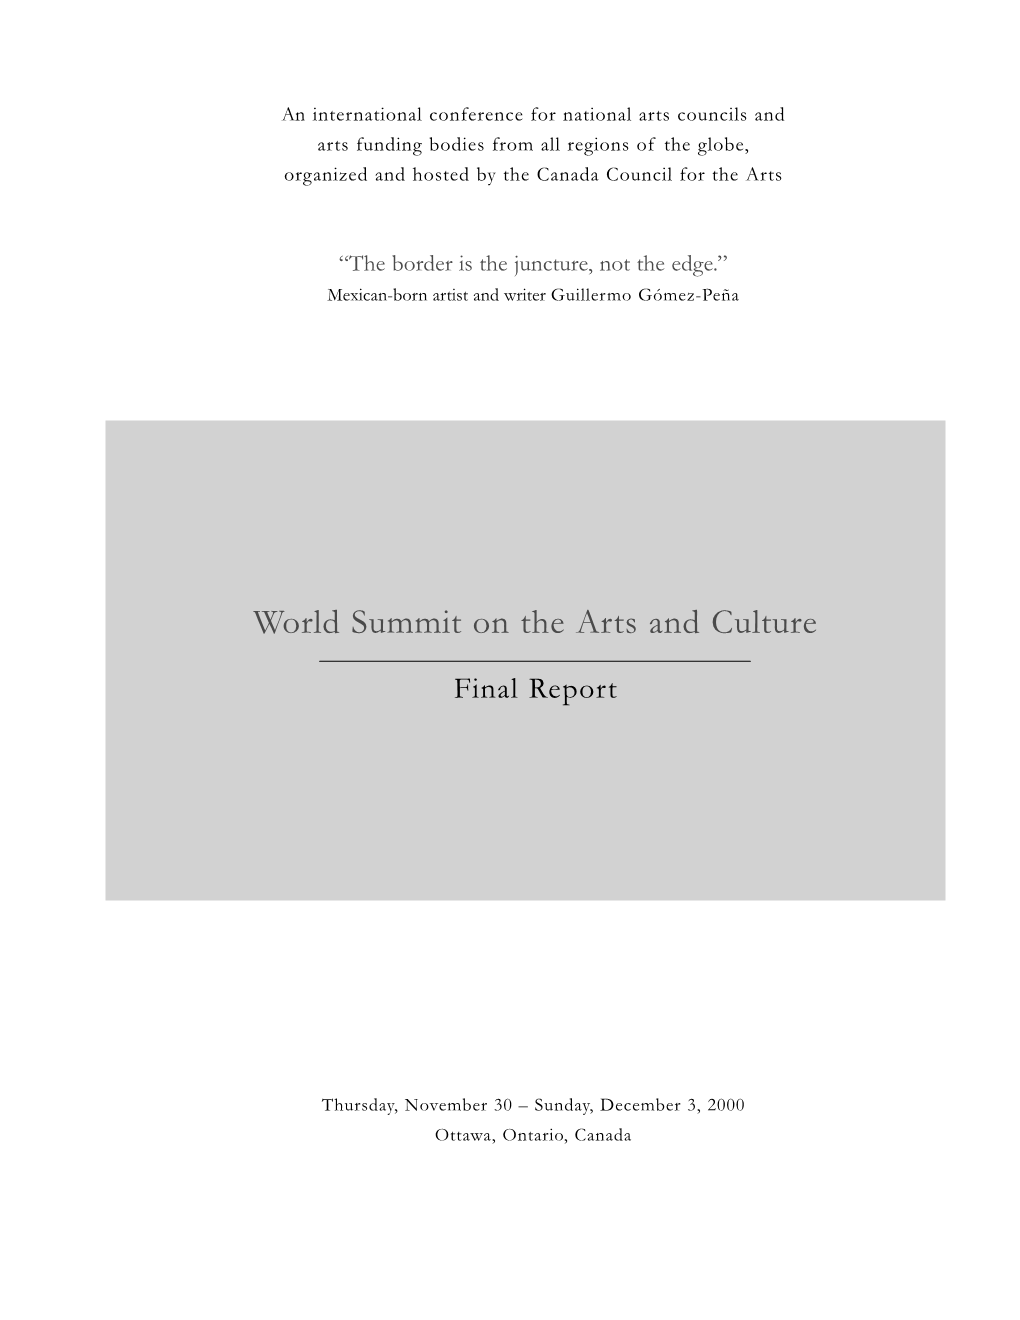 First World Summit on the Arts and Culture: Final Report